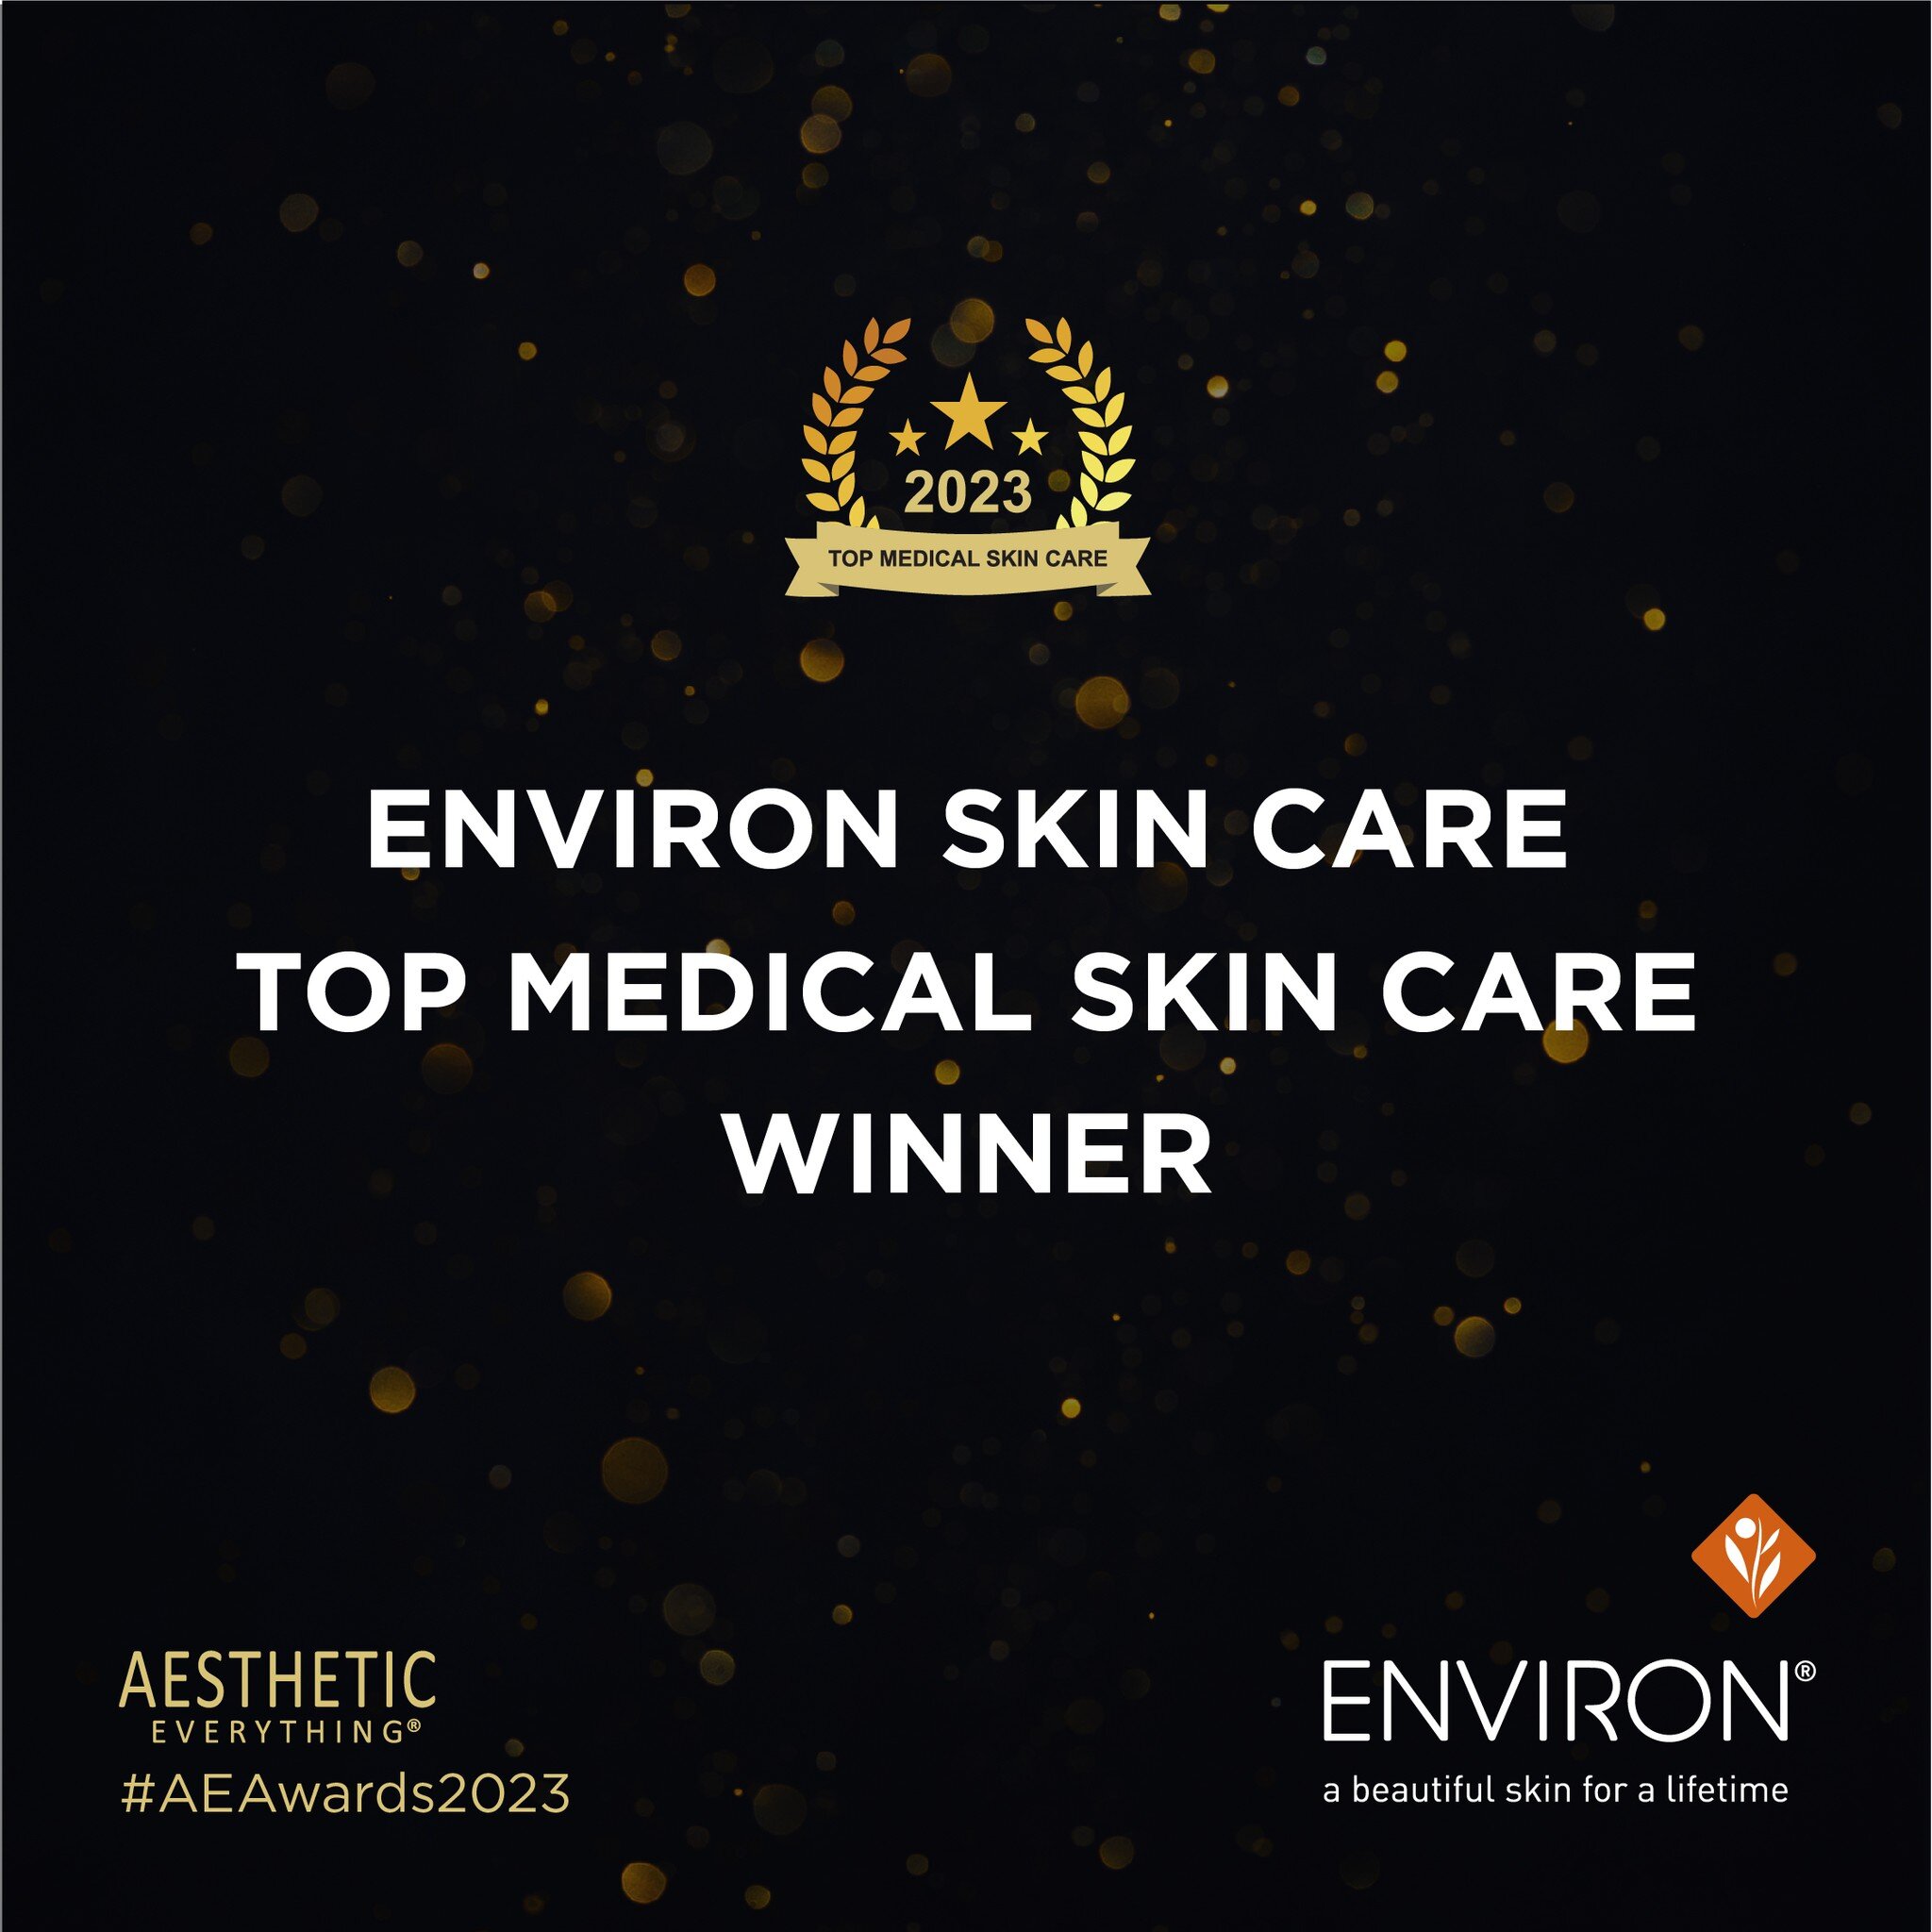 🏆This is why we stock and use Environ Medical Skin Care at 360 Skin Studio. 
🏆It is the best of the best!
🏆Please contact us for a FREE Skin Consultation and Skin Care Prescription.😊

🌟Environ has been recognised as the &ldquo;Top Medical Skin C